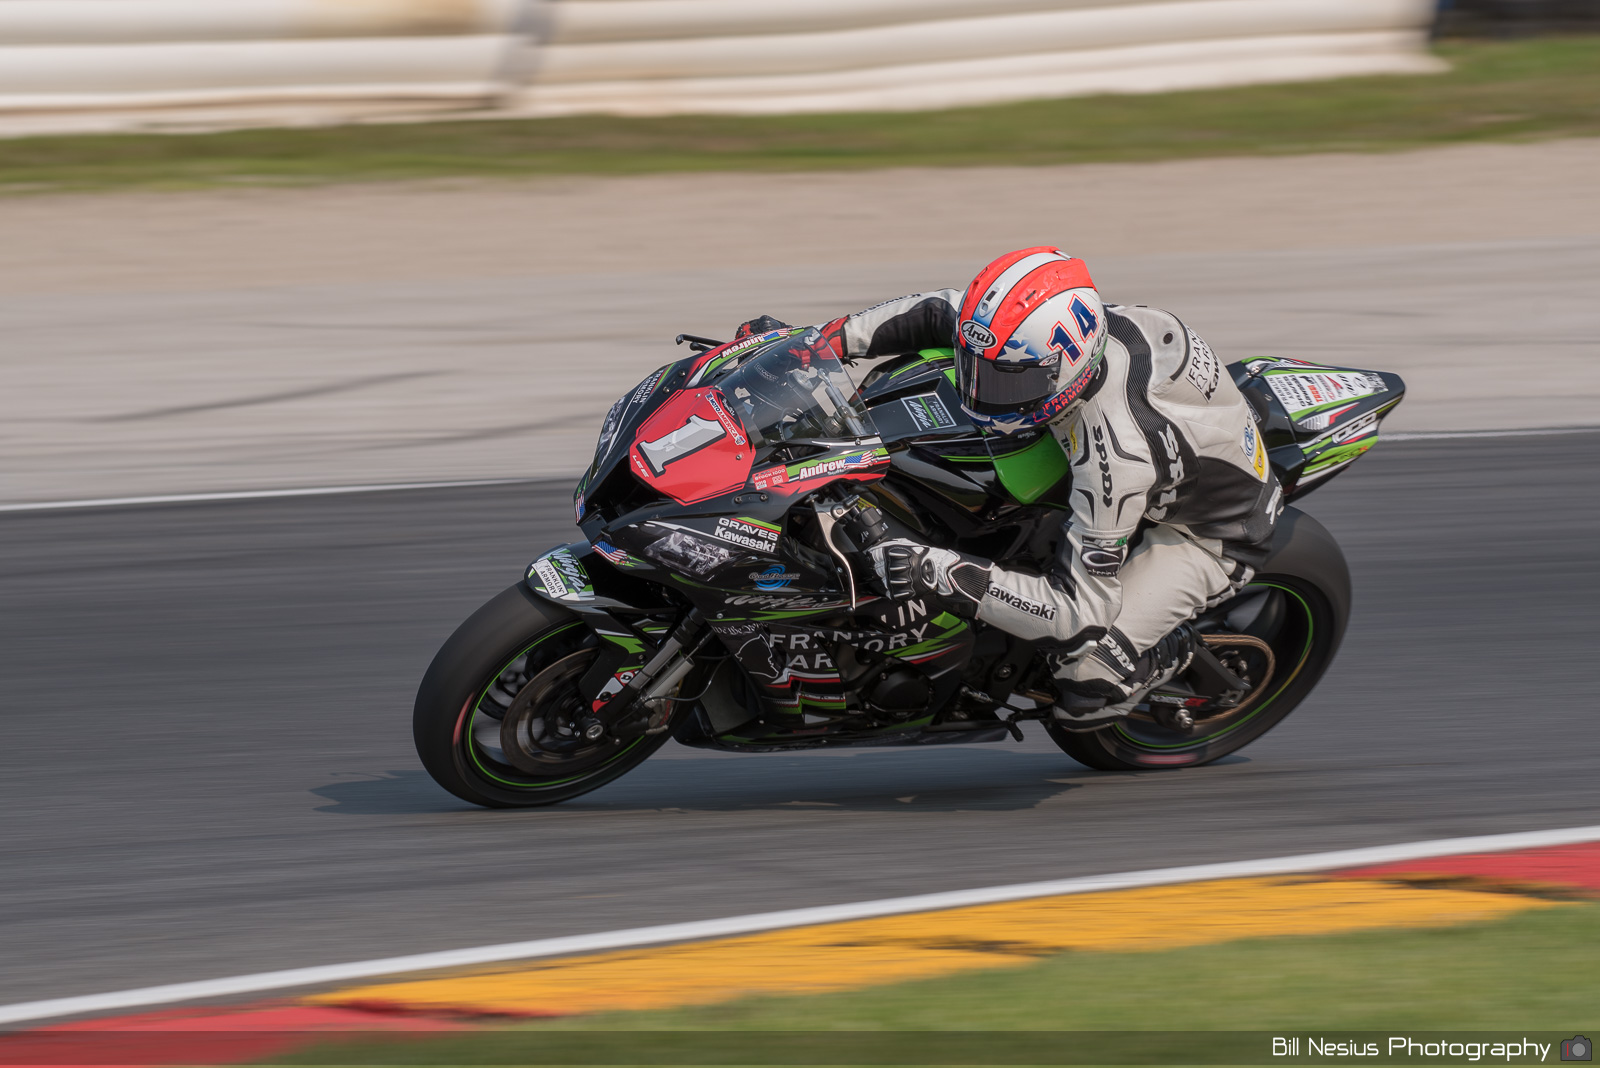 Andrew Lee on the Number 1 Franklin Armory Kawasaki ZX-10R / DSC_6350 / 4